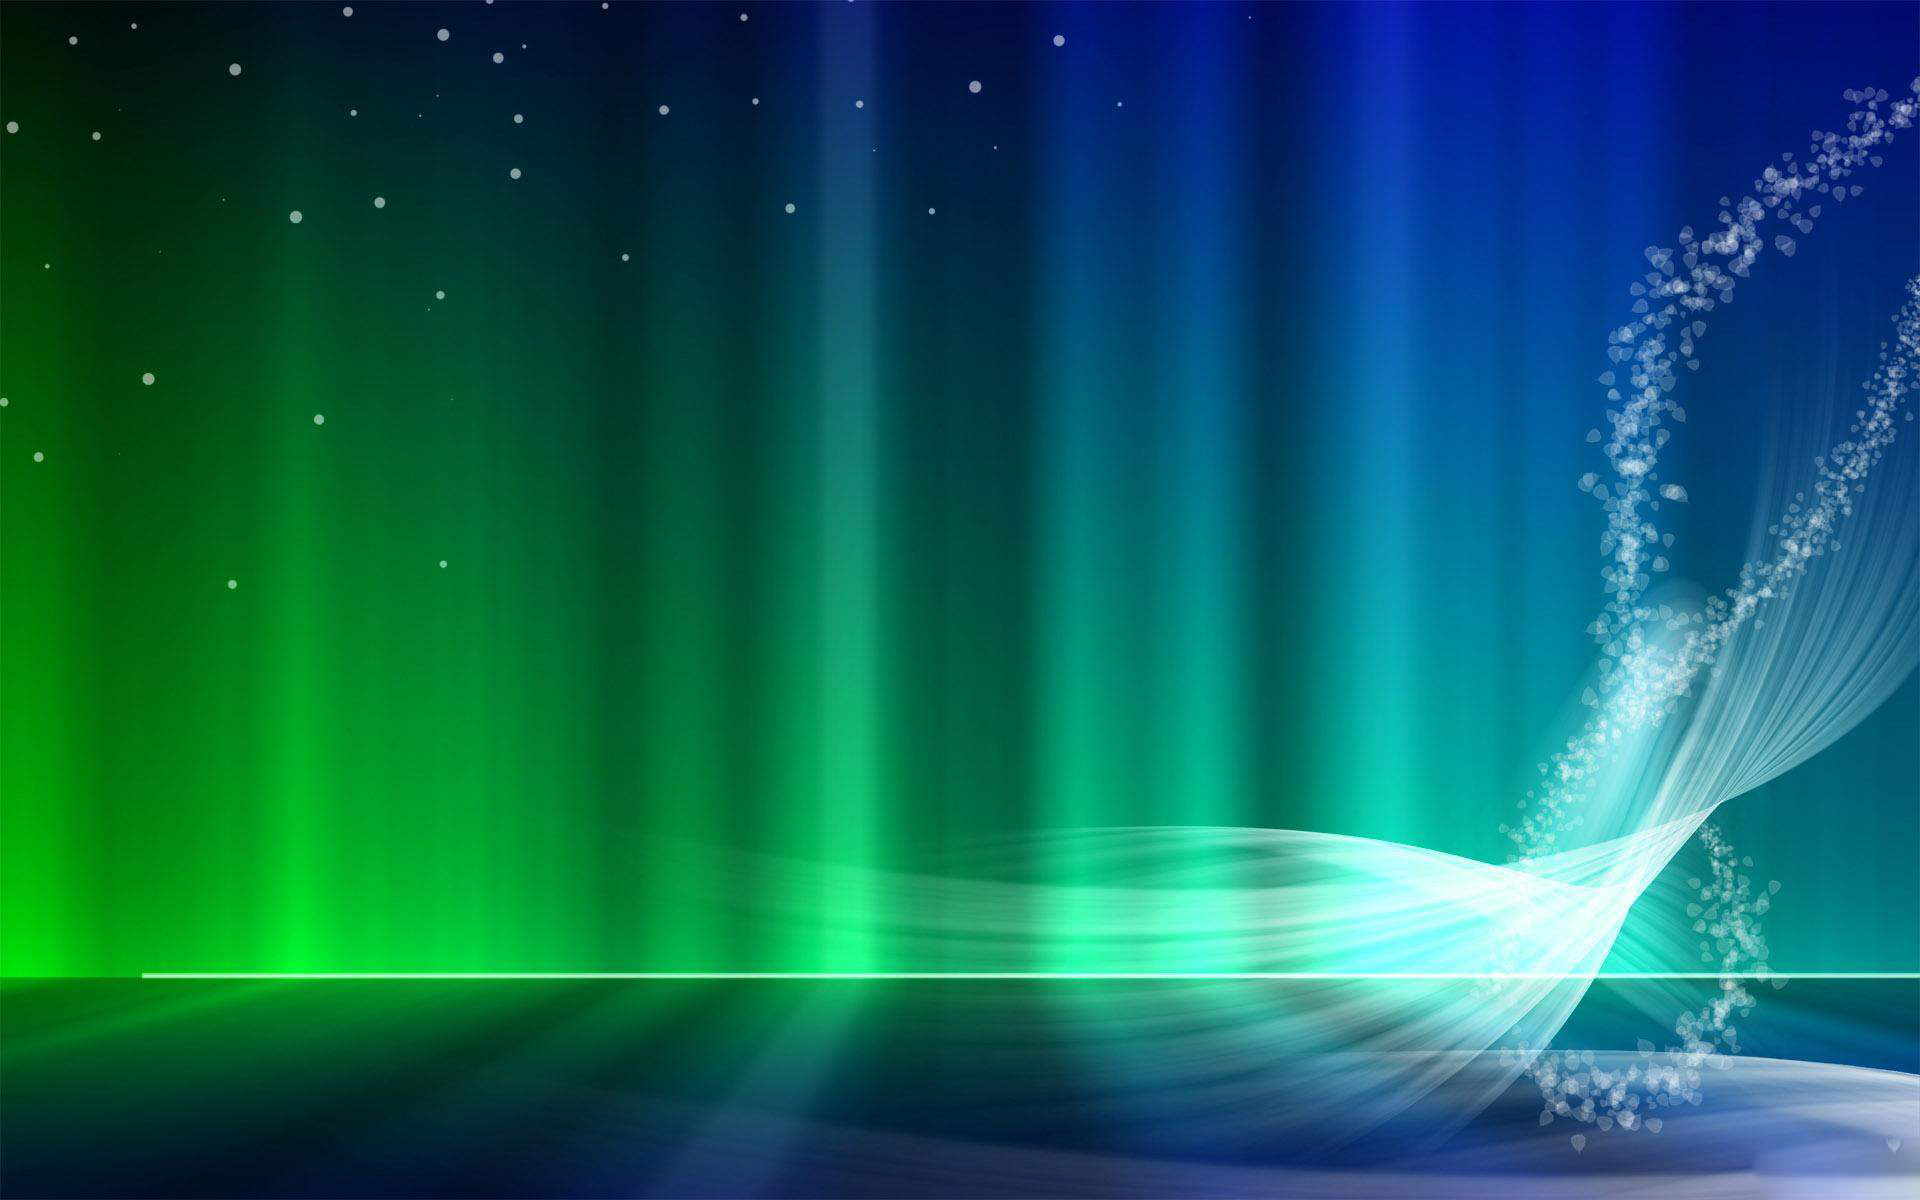 1920x1200 Live Backgrounds For PC Free Download PixelsTalk Net Windows Live  Backgrounds For PC